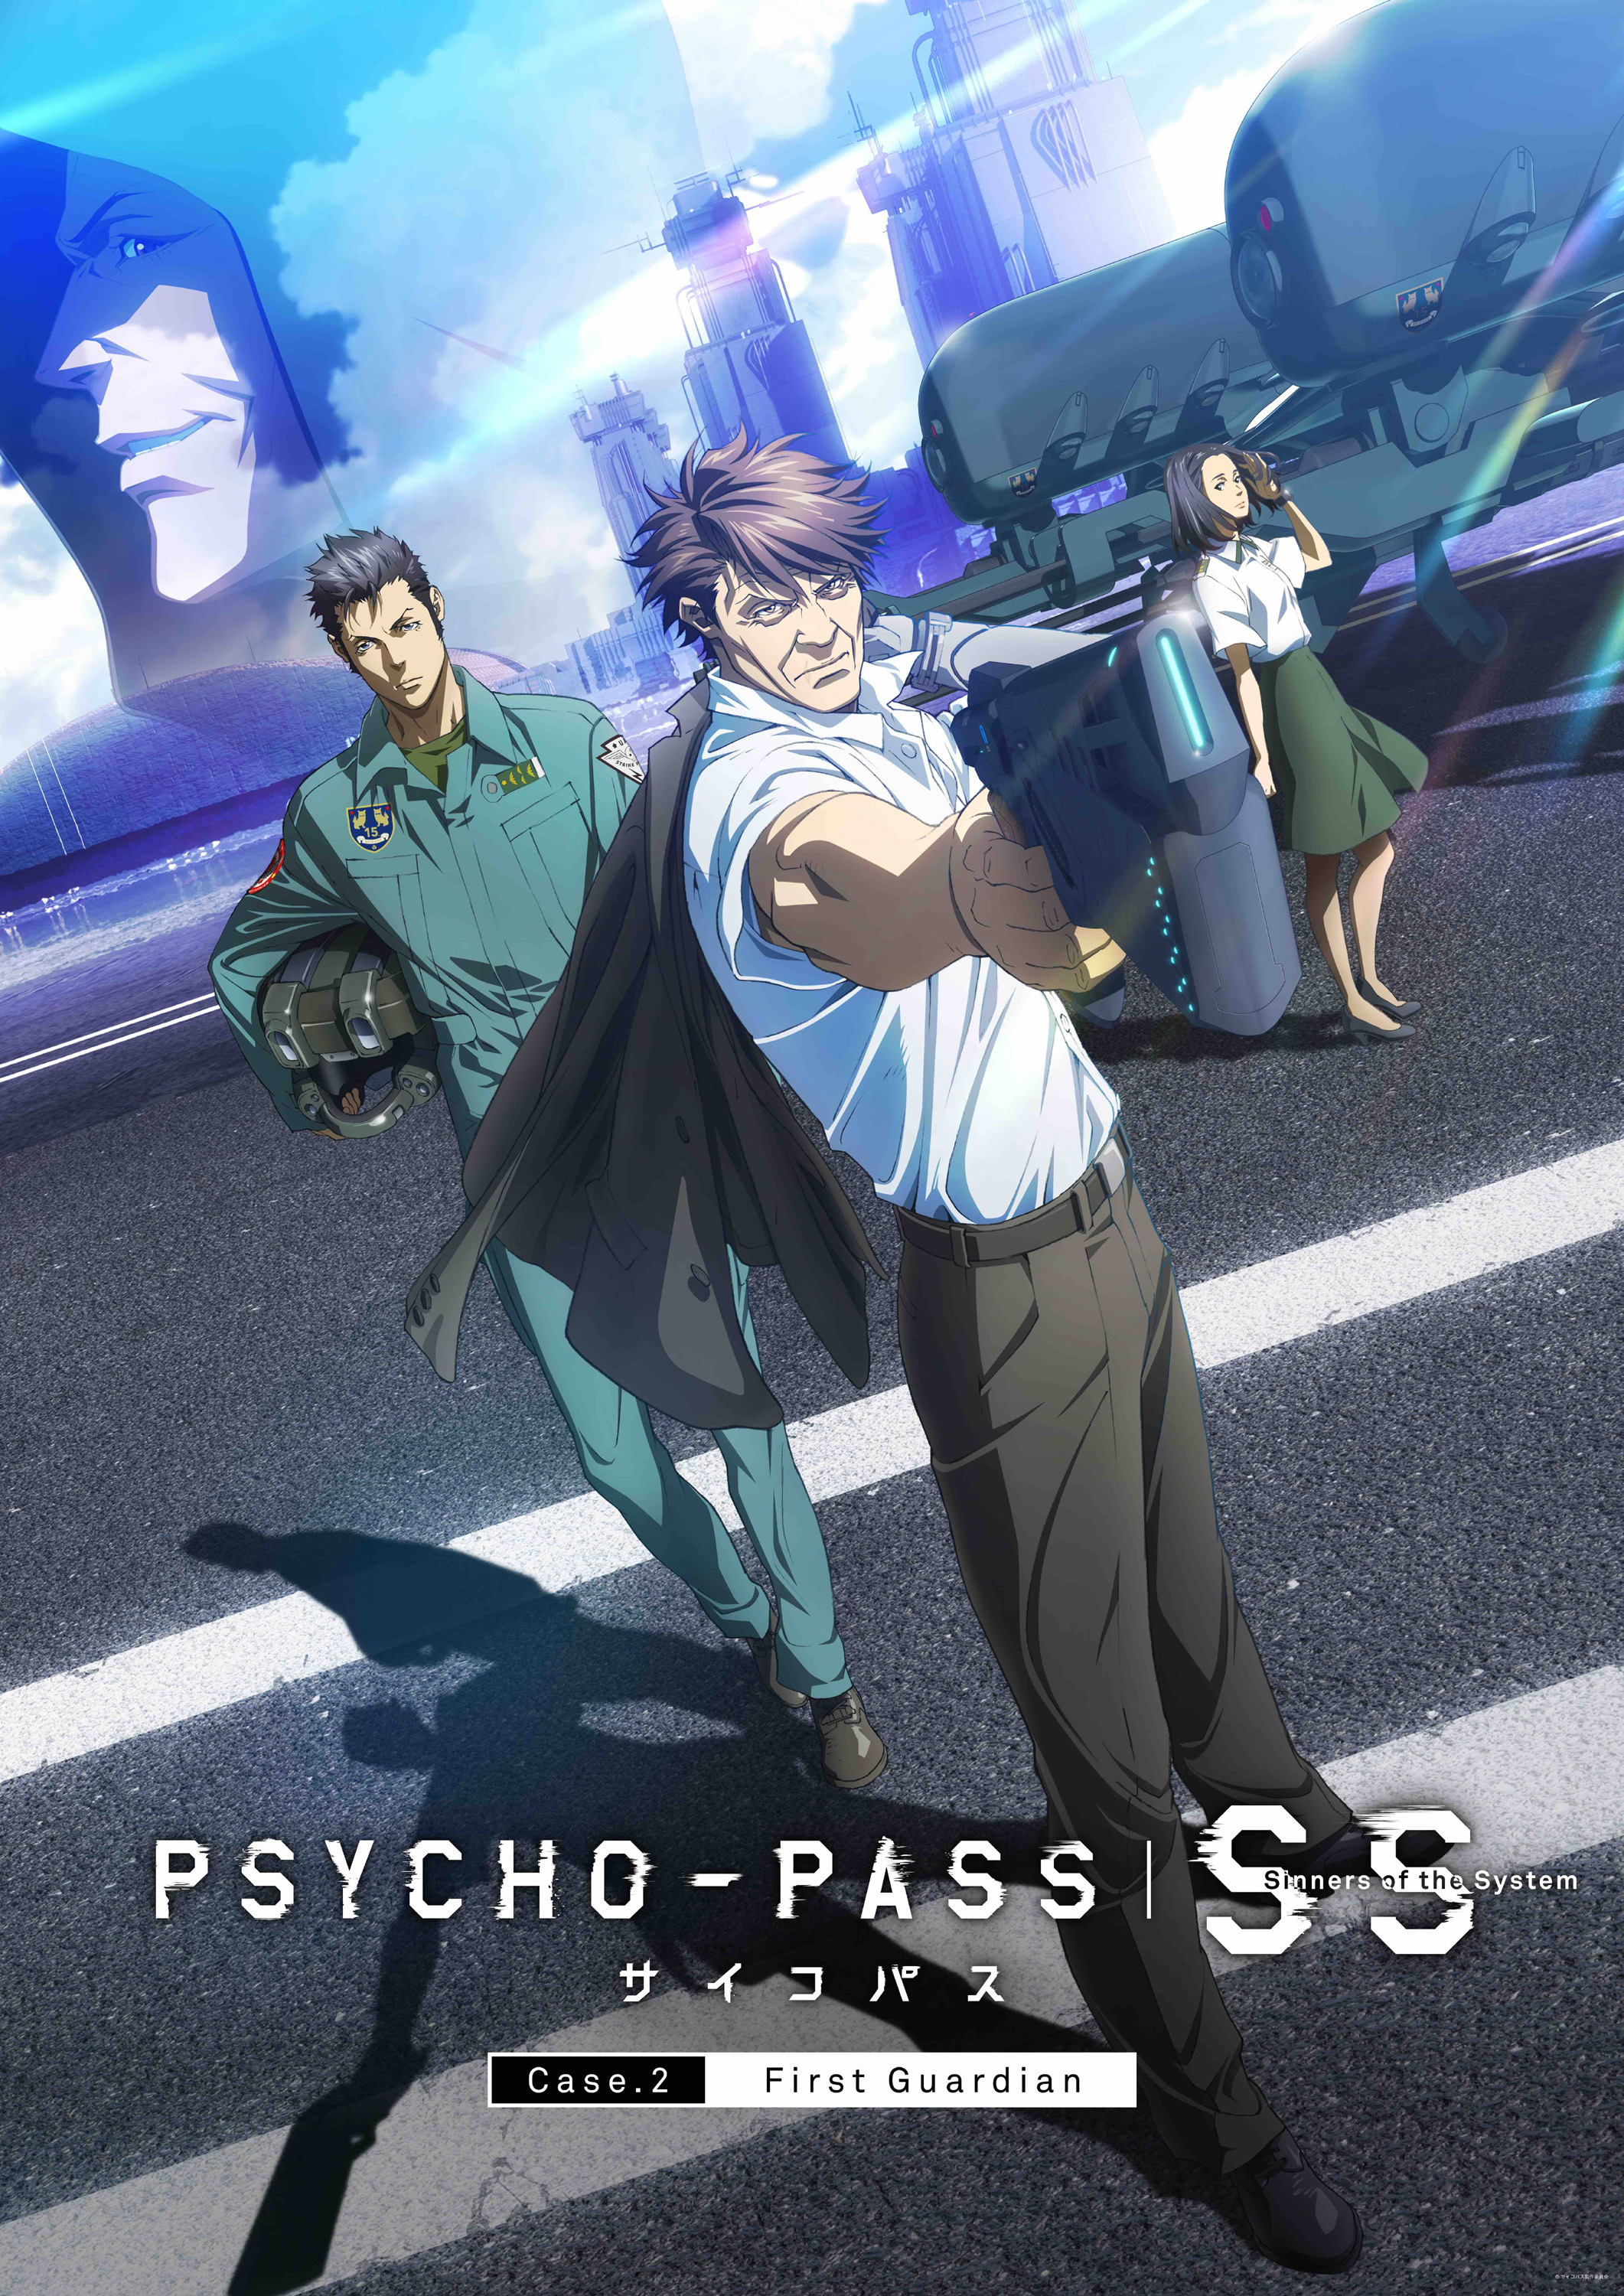 『PSYCHO-PASS サイコパスSinners of the System Case.2 First Guardian』